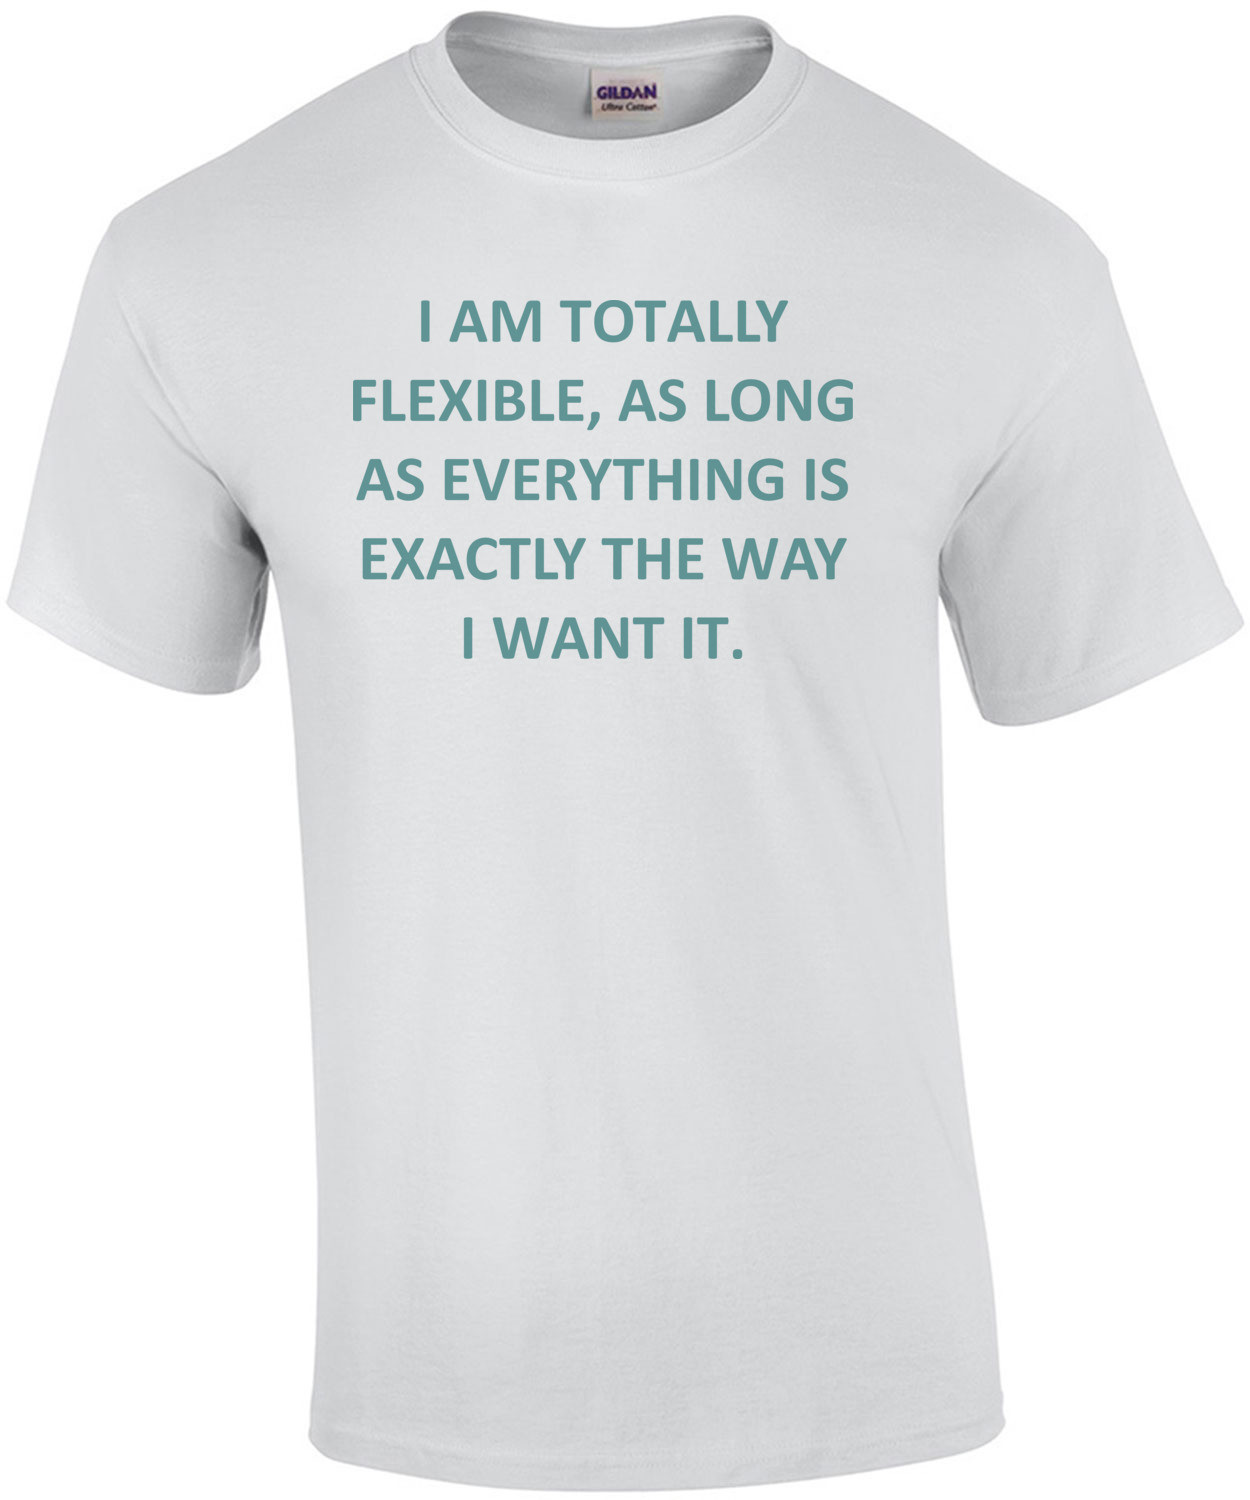 I AM TOTALLY FLEXIBLE, AS LONG AS EVERYTHING IS EXACTLY THE WAY I WANT IT. Funny